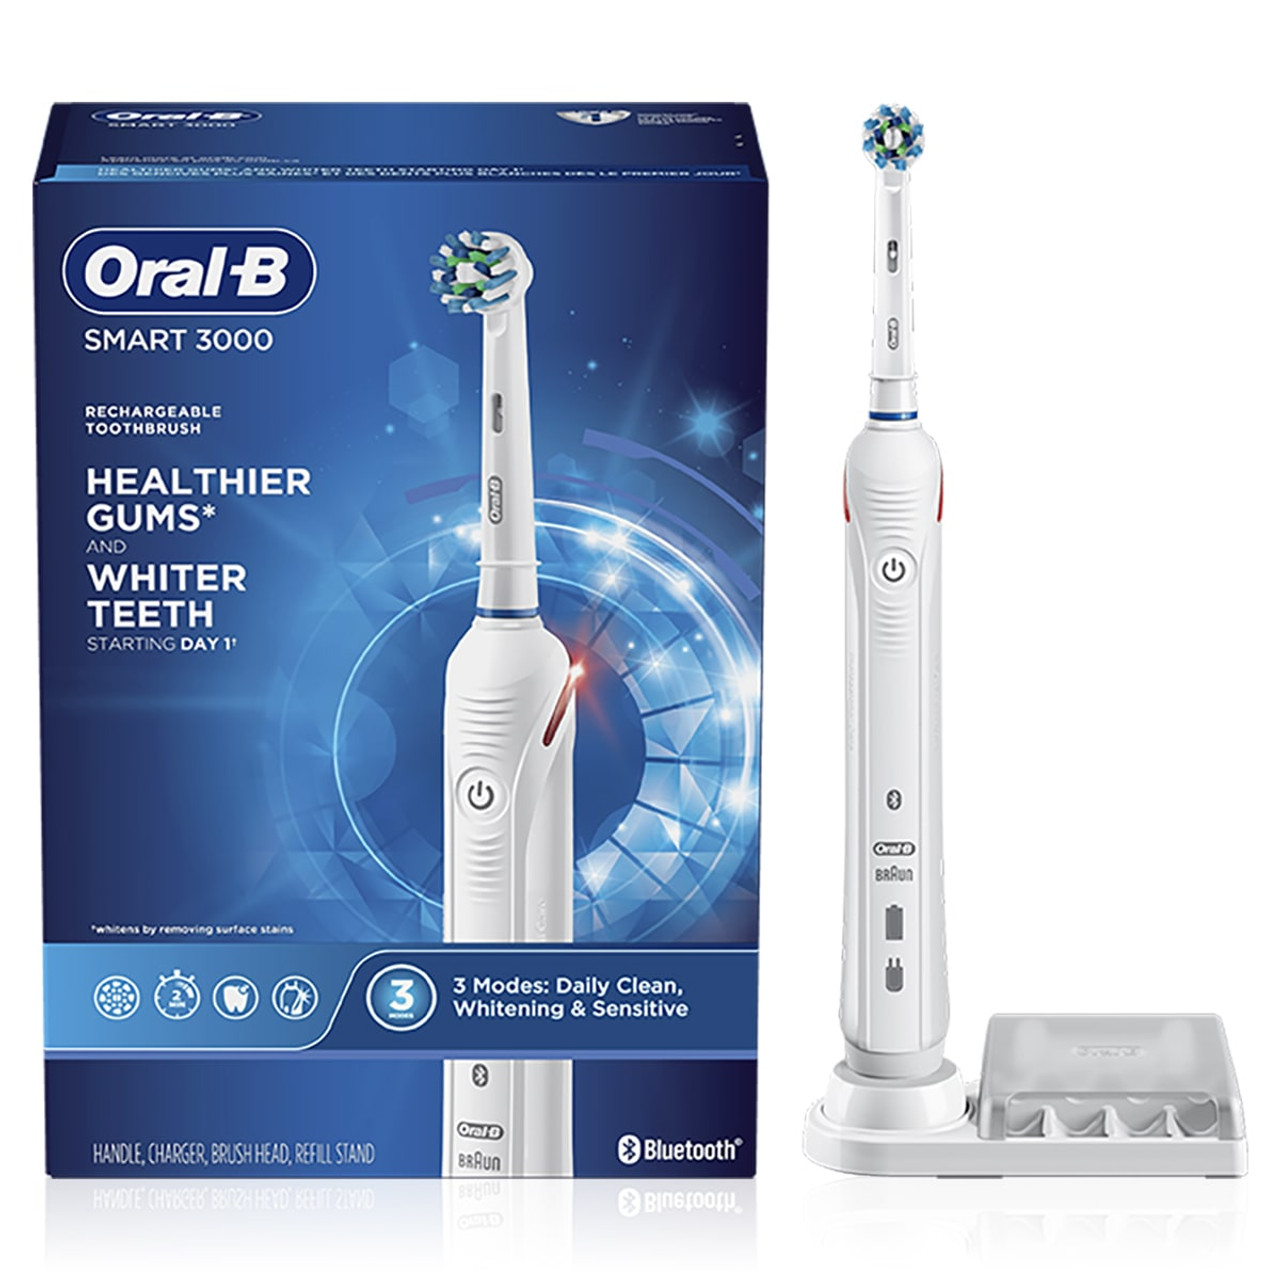 Oral B Electric Toothbrush 3000 Wholesale Outlet Save 61 Jlcatj gob mx